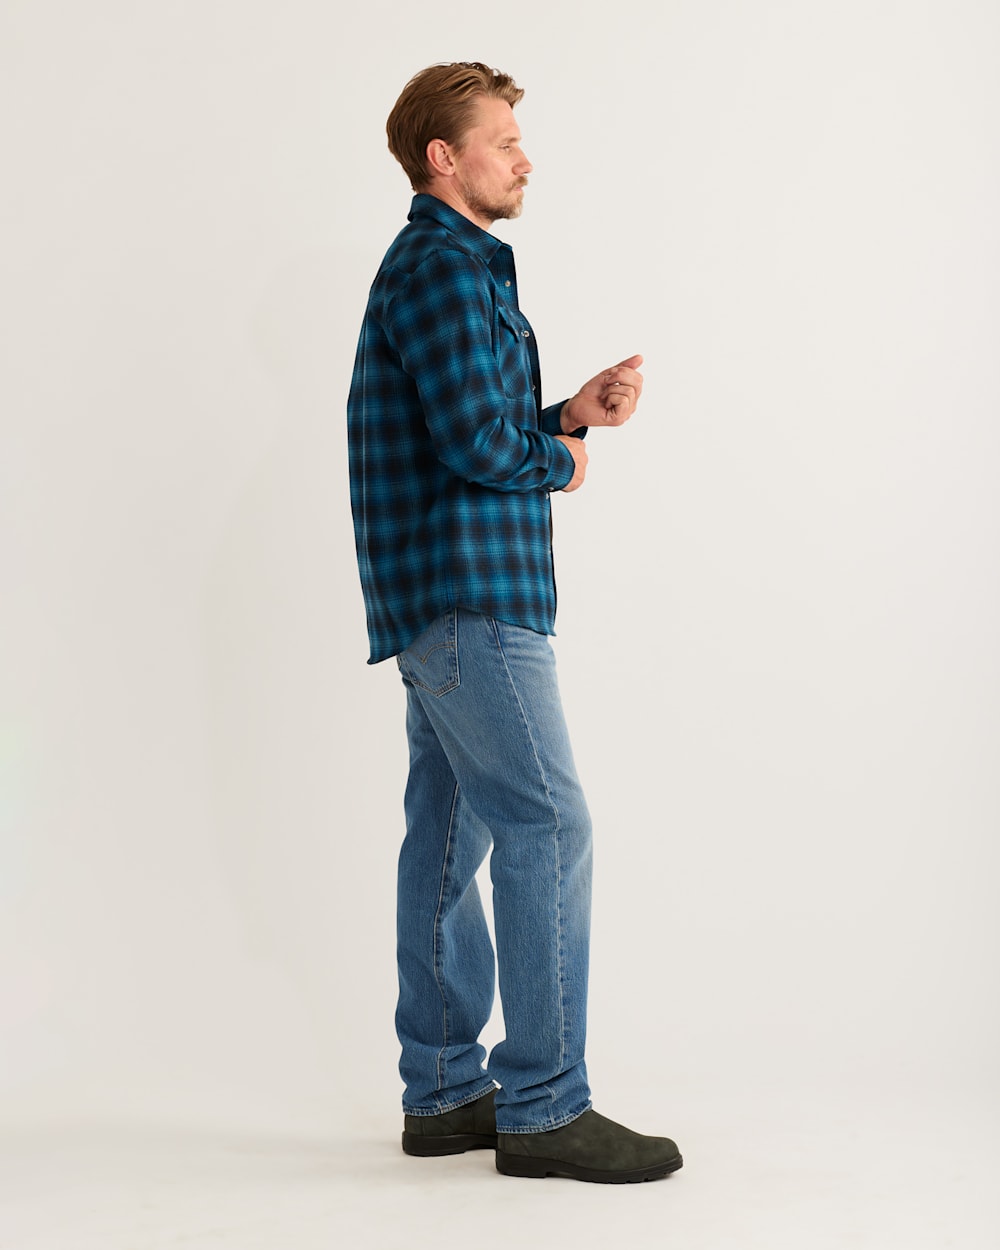 ALTERNATE VIEW OF MEN'S PLAID SNAP-FRONT WESTERN CANYON SHIRT IN BLUE OMBRE image number 2